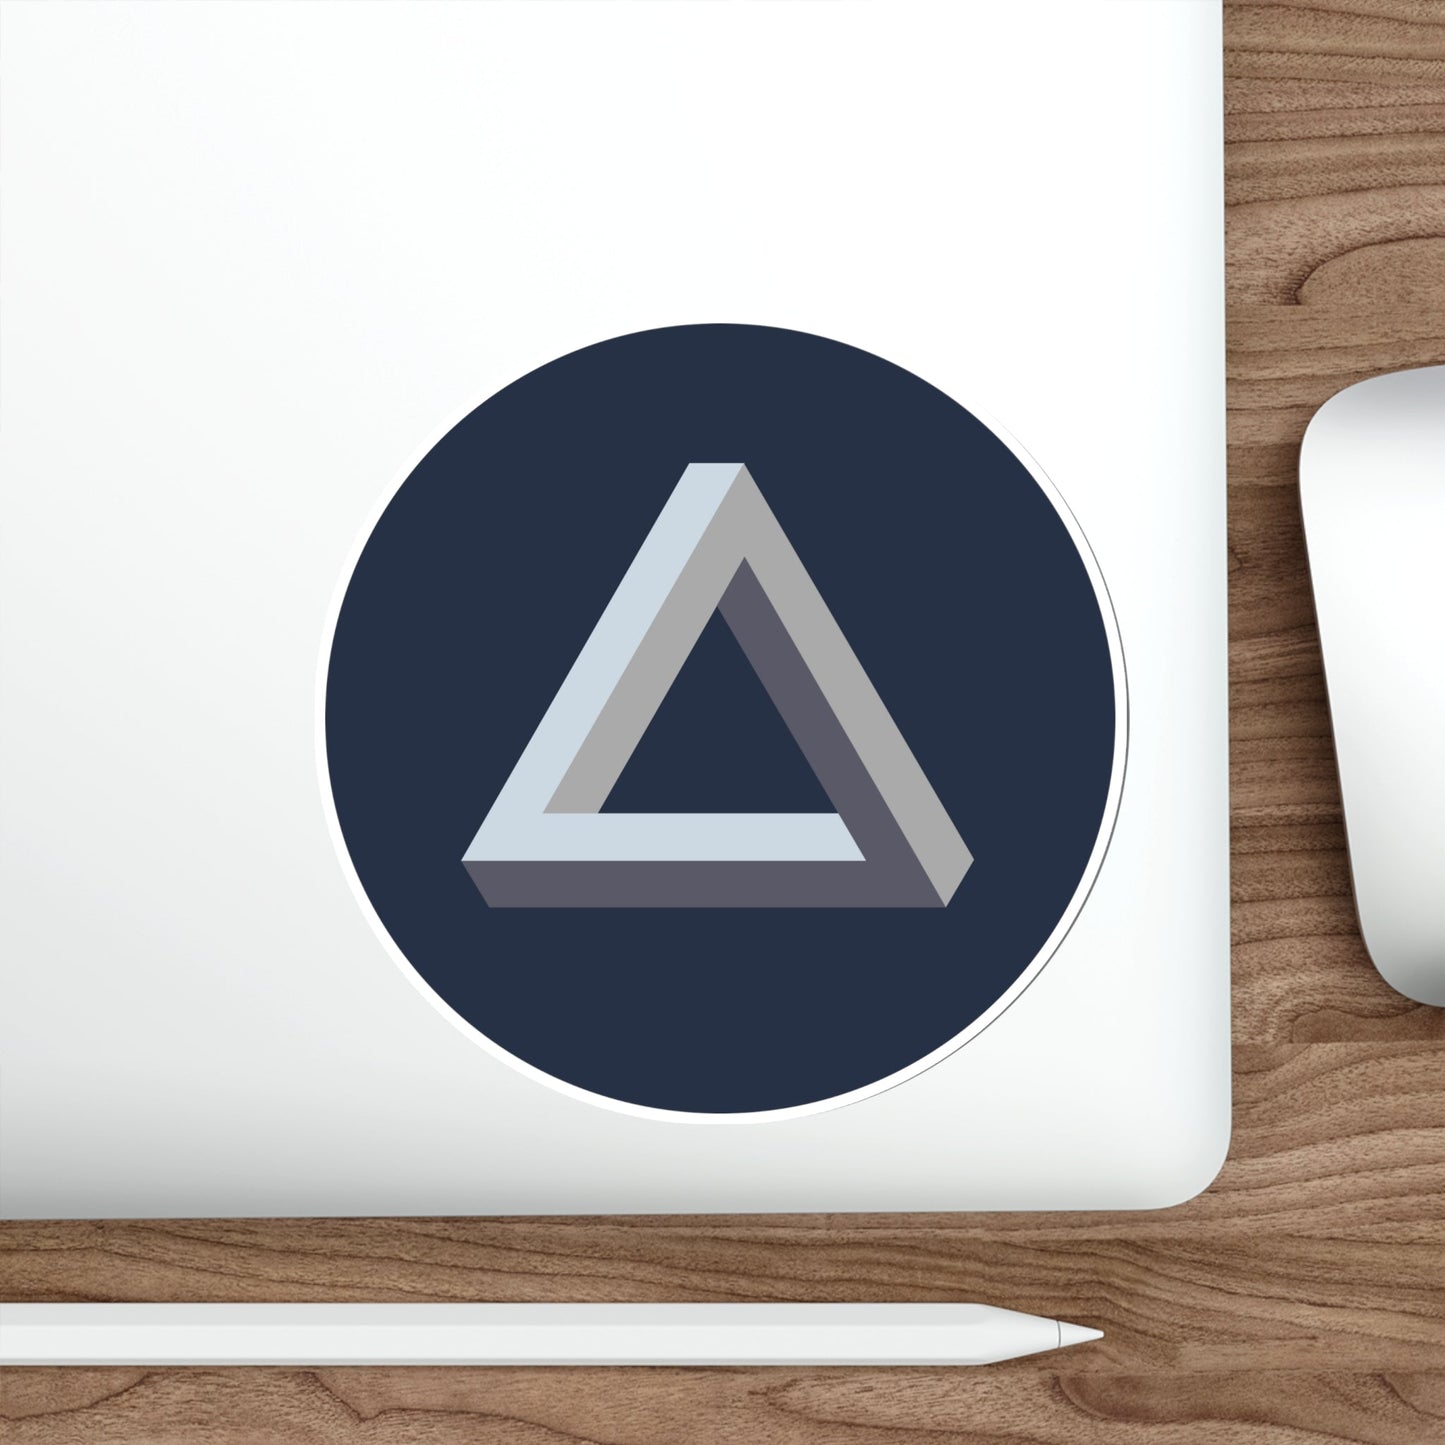 ARPA CHAIN ARPA (Cryptocurrency) STICKER Vinyl Die-Cut Decal-The Sticker Space